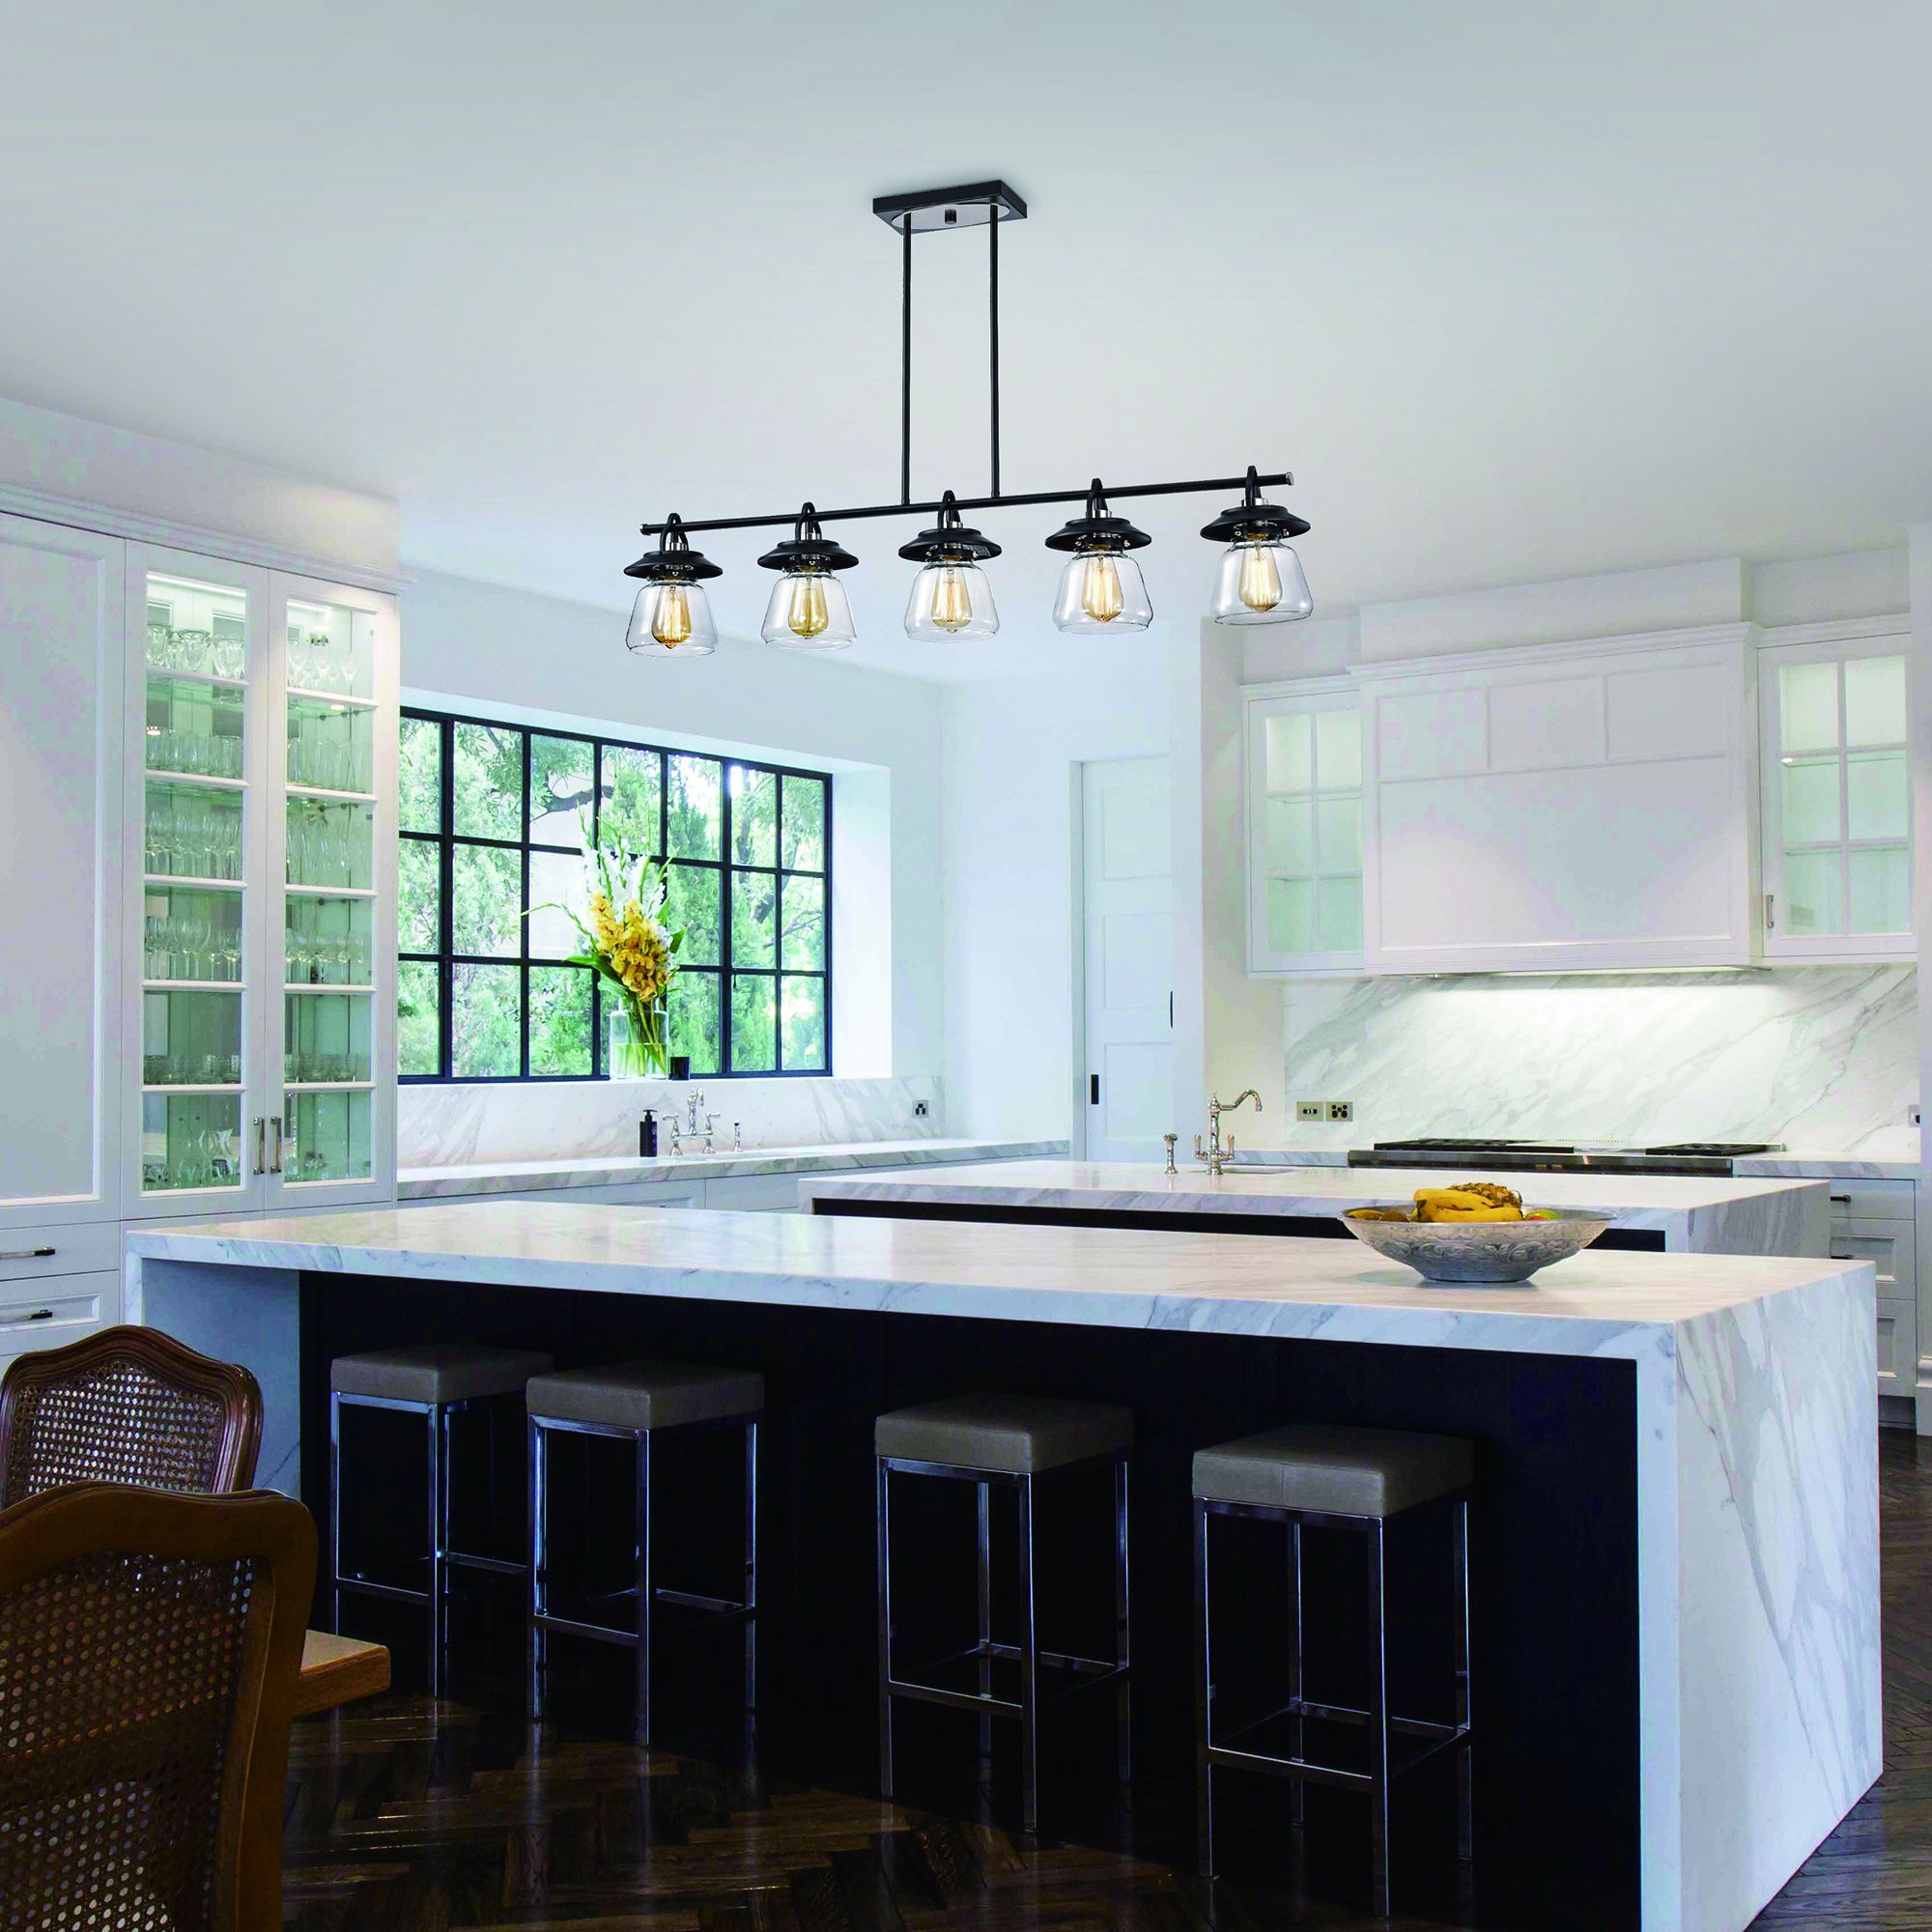 5 Light Black And Brushed Nickel Kitchen Island Pendant With Regard To Black And Gold Kitchen Island Light Pendant (View 8 of 15)